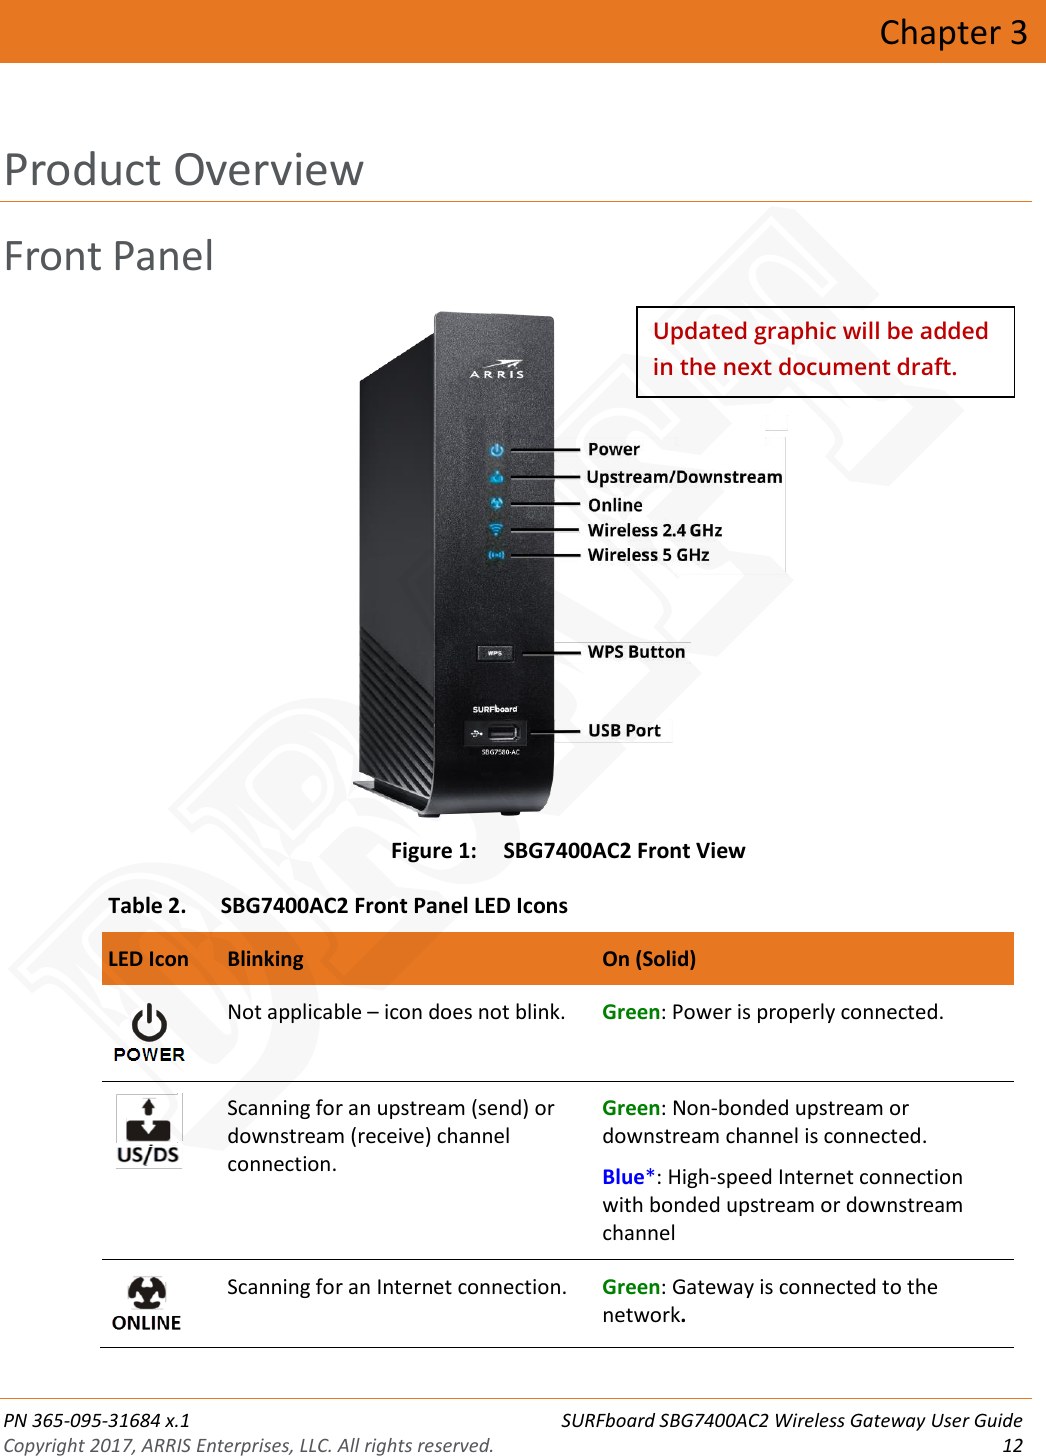  PN 365-095-31684 x.1 SURFboard SBG7400AC2 Wireless Gateway User Guide Copyright 2017, ARRIS Enterprises, LLC. All rights reserved. 12  Chapter 3 Product Overview Front Panel  Figure 1: SBG7400AC2 Front View Table 2. SBG7400AC2 Front Panel LED Icons  LED Icon Blinking On (Solid)    Not applicable – icon does not blink. Green: Power is properly connected.     Scanning for an upstream (send) or downstream (receive) channel connection. Green: Non-bonded upstream or downstream channel is connected. Blue*: High-speed Internet connection with bonded upstream or downstream channel    Scanning for an Internet connection. Green: Gateway is connected to the network. Updated graphic will be added in the next document draft. DRAFT